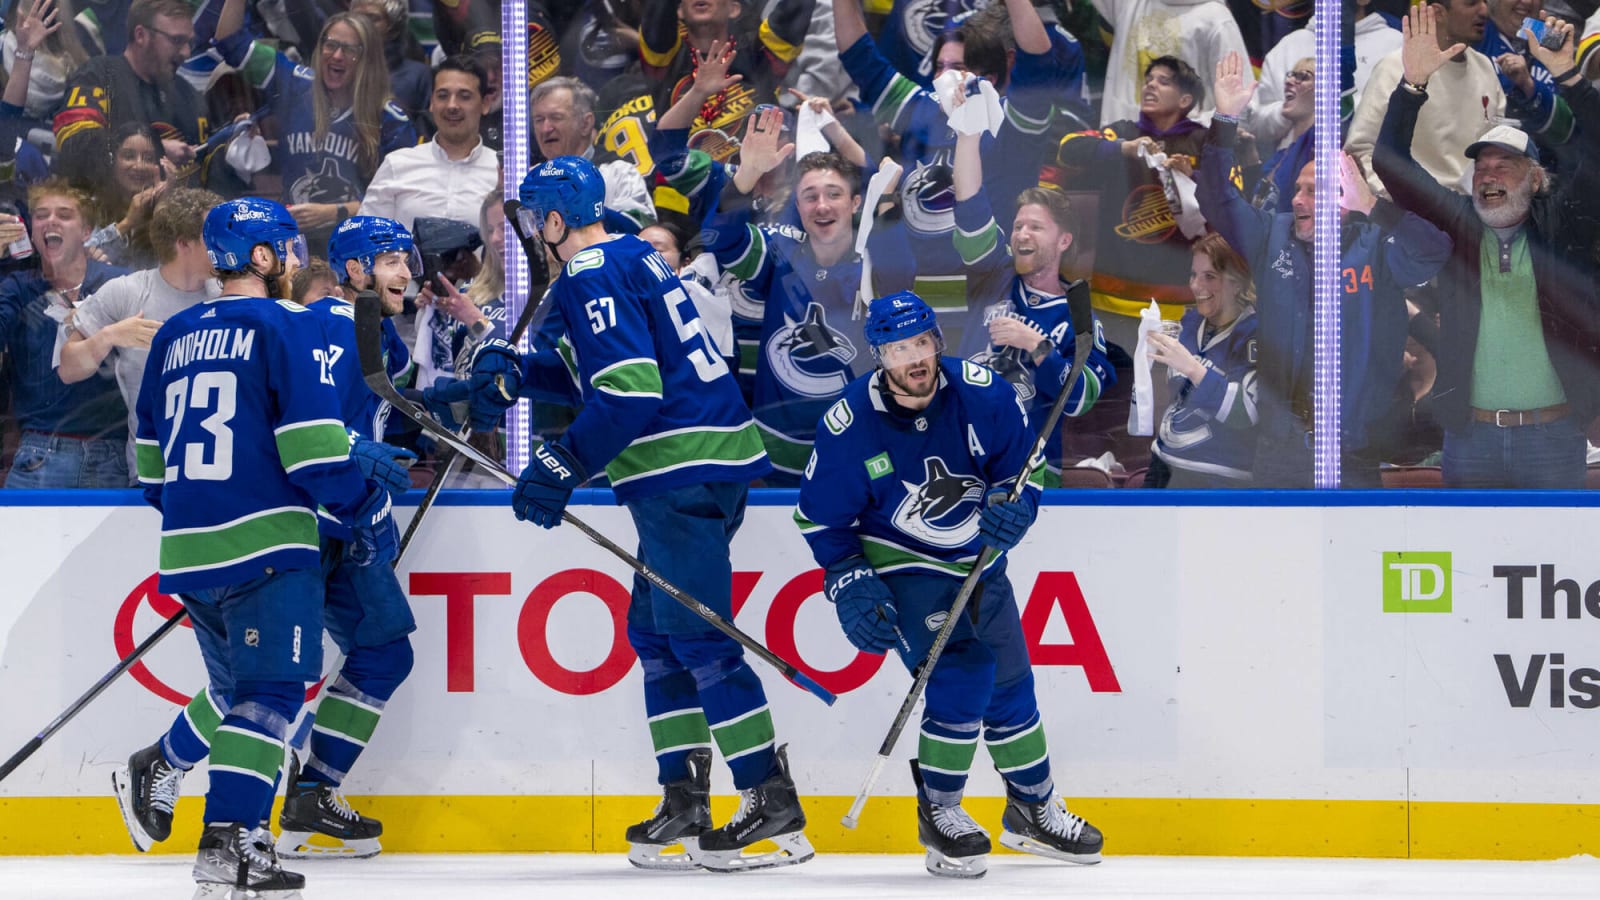 Scenes from Rogers Arena: Boeser injury news dominates morning of Game 7 between Canucks and Oilers